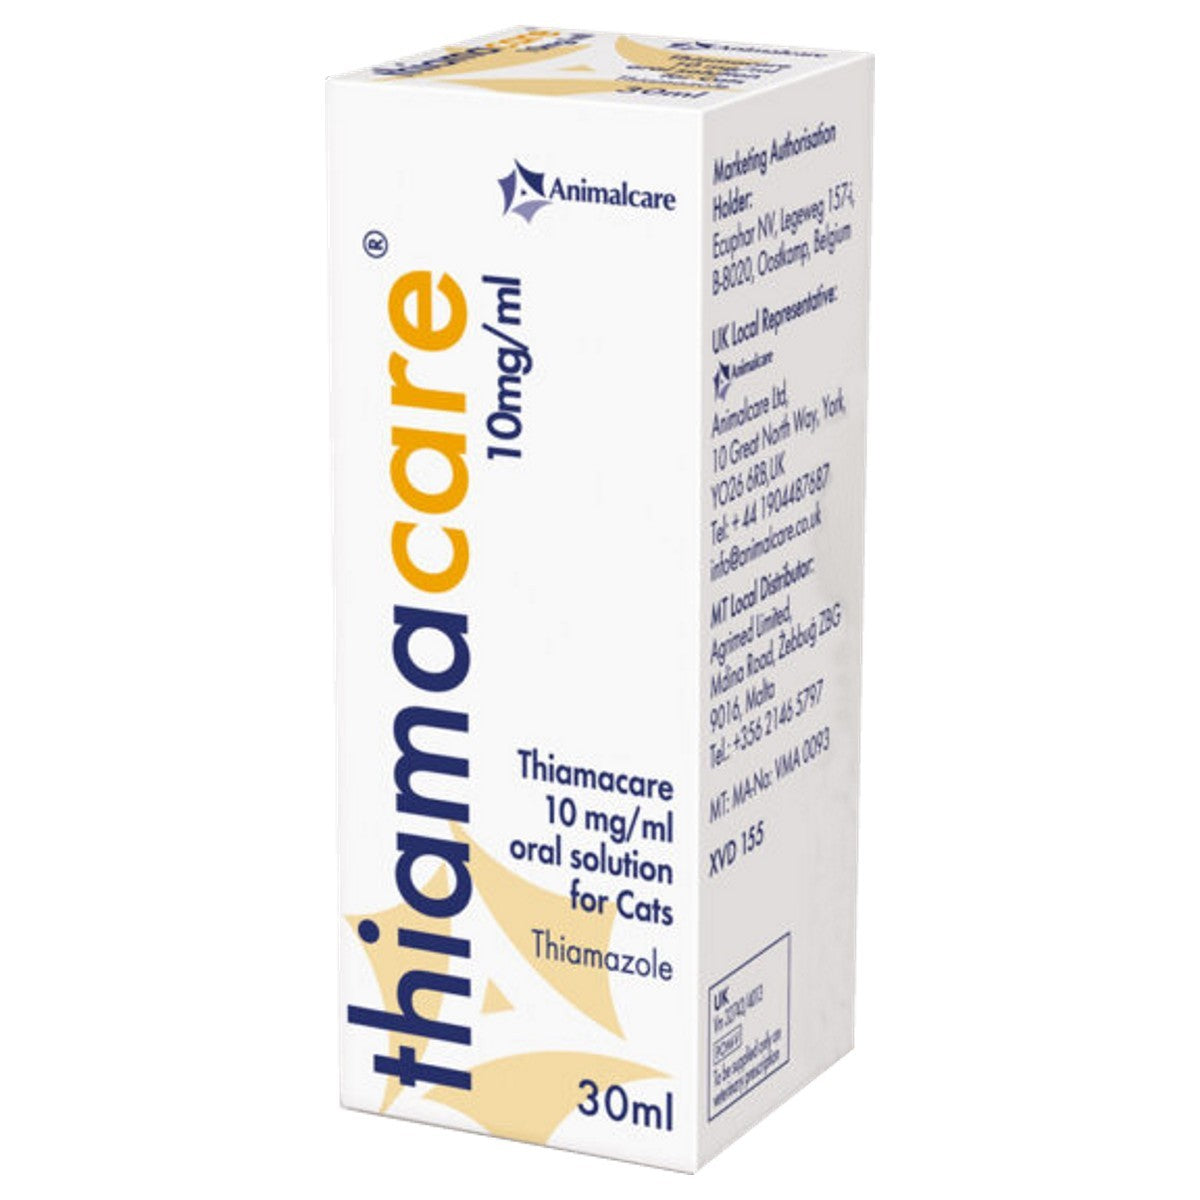 Thiamacare 10mg/ml Oral Solution for Cats 30ml